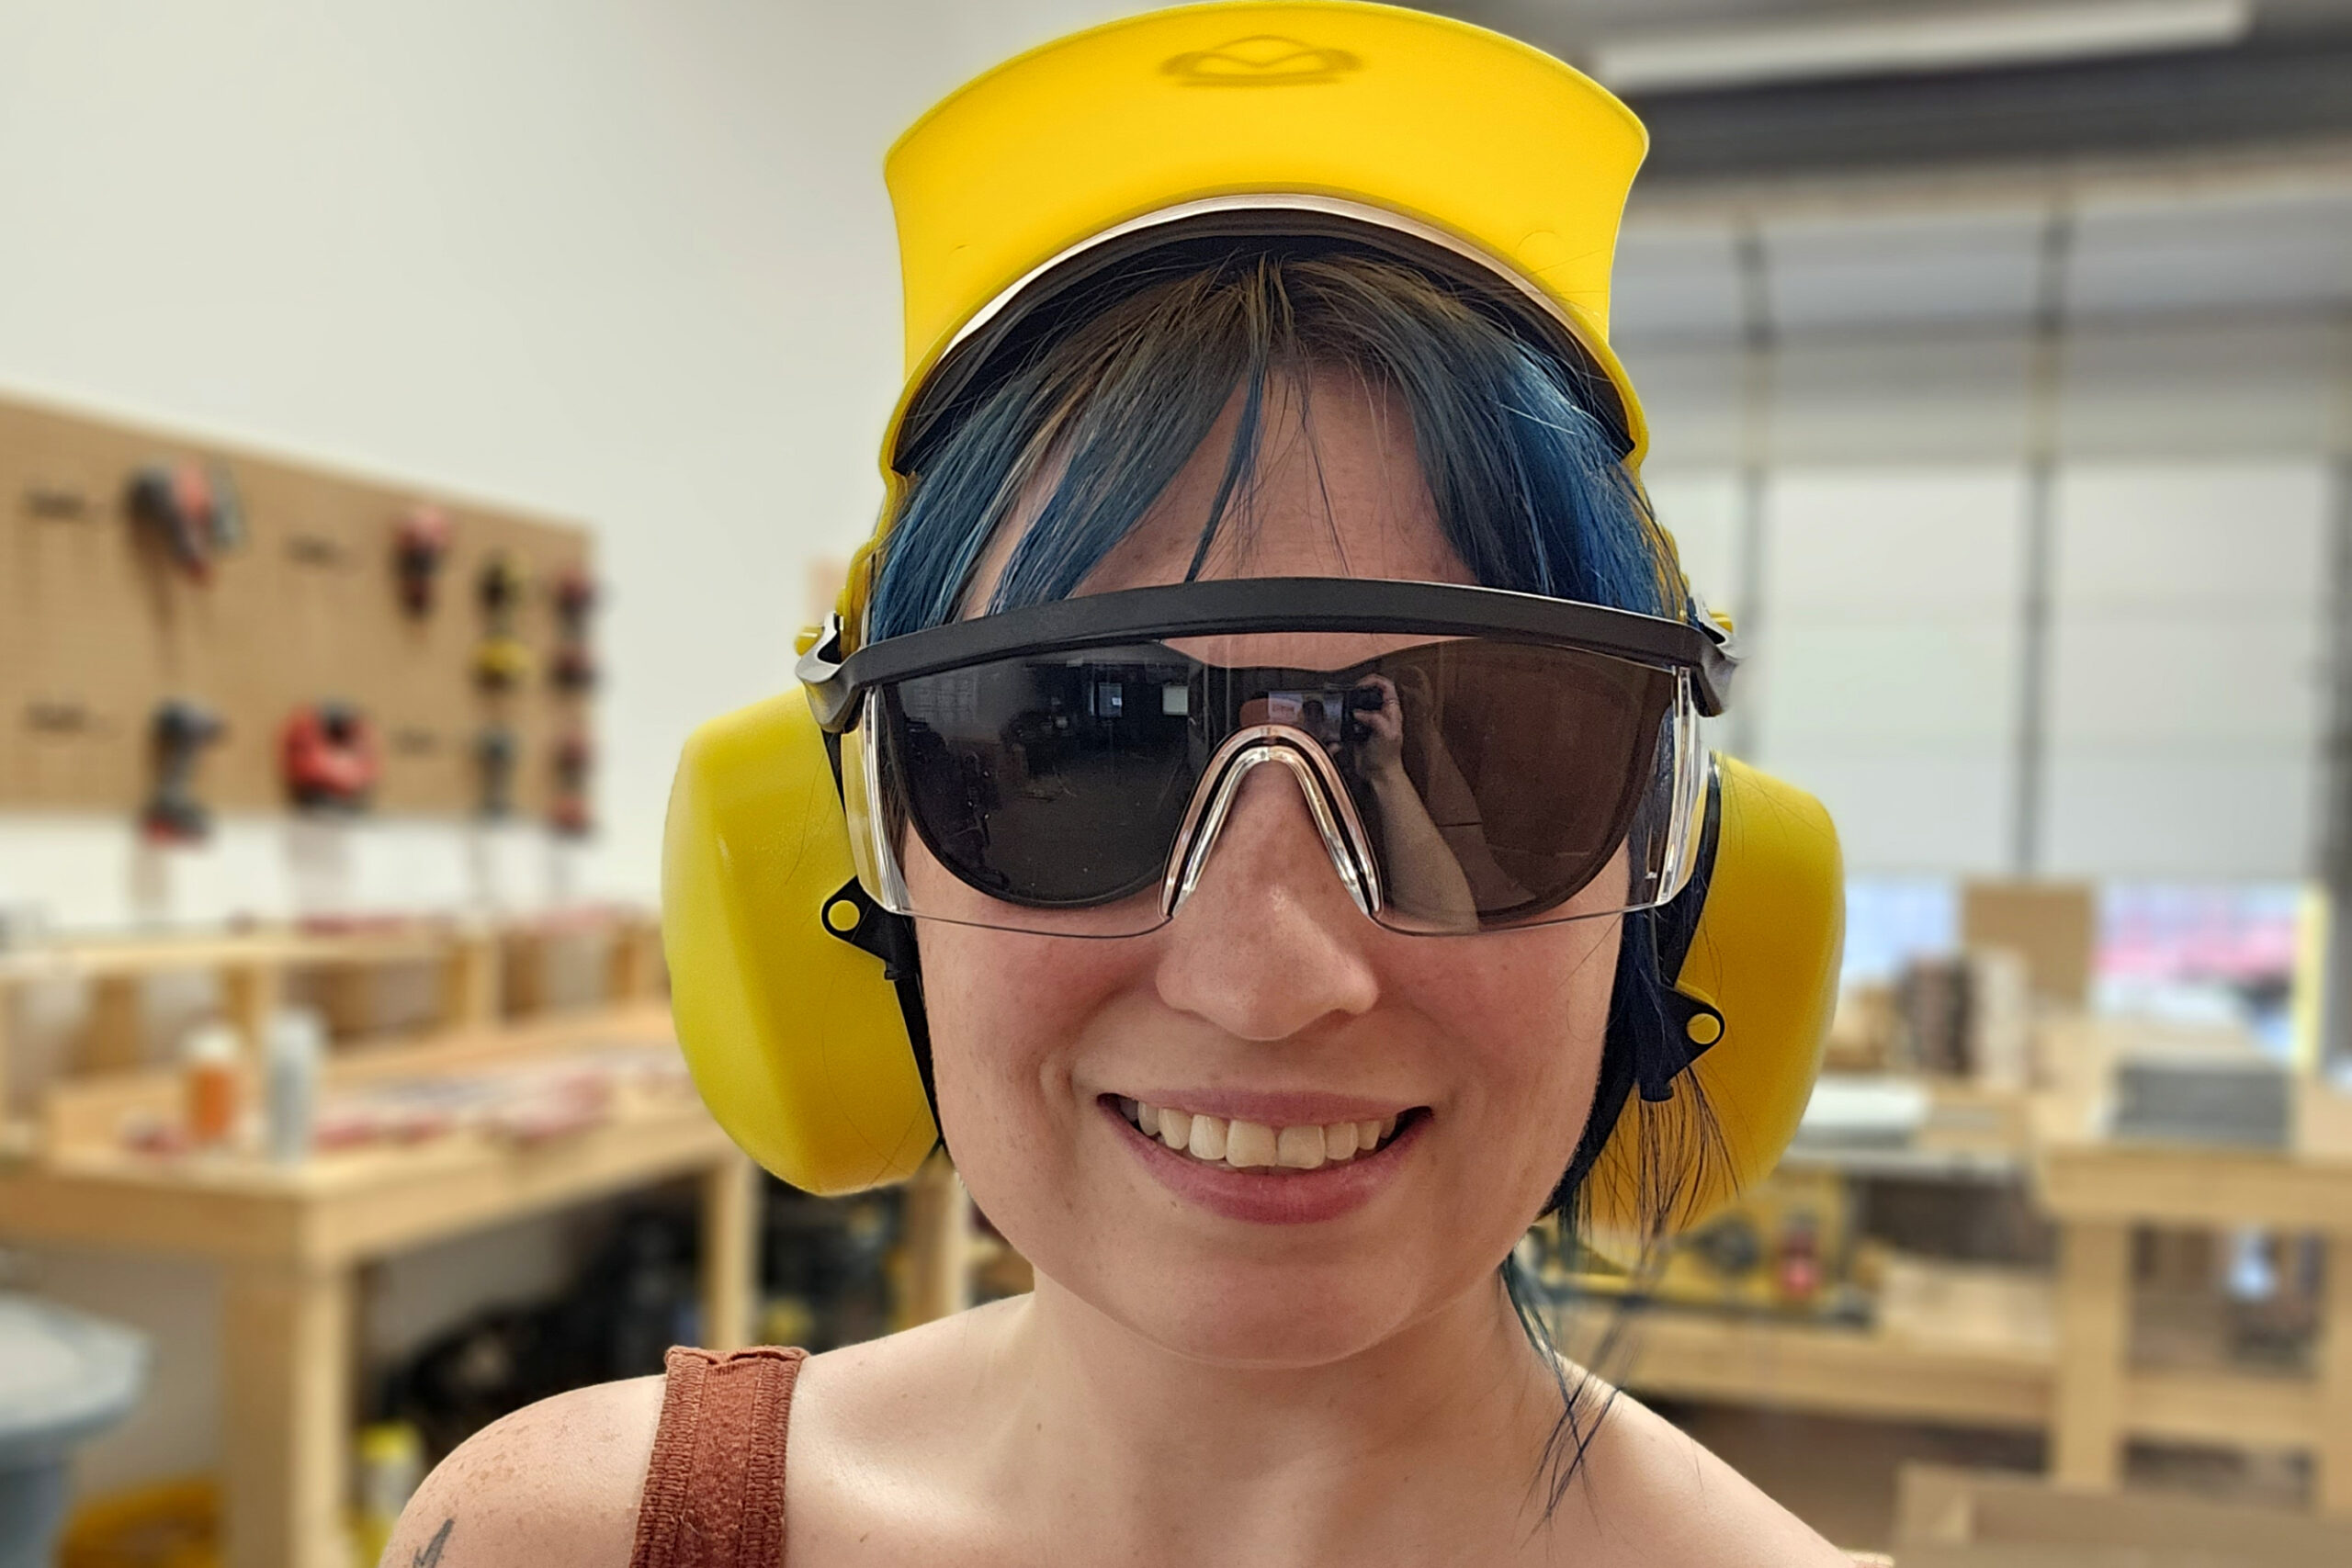 Groggle noise reduction earmuffs and construction safety glasses: double glasses test